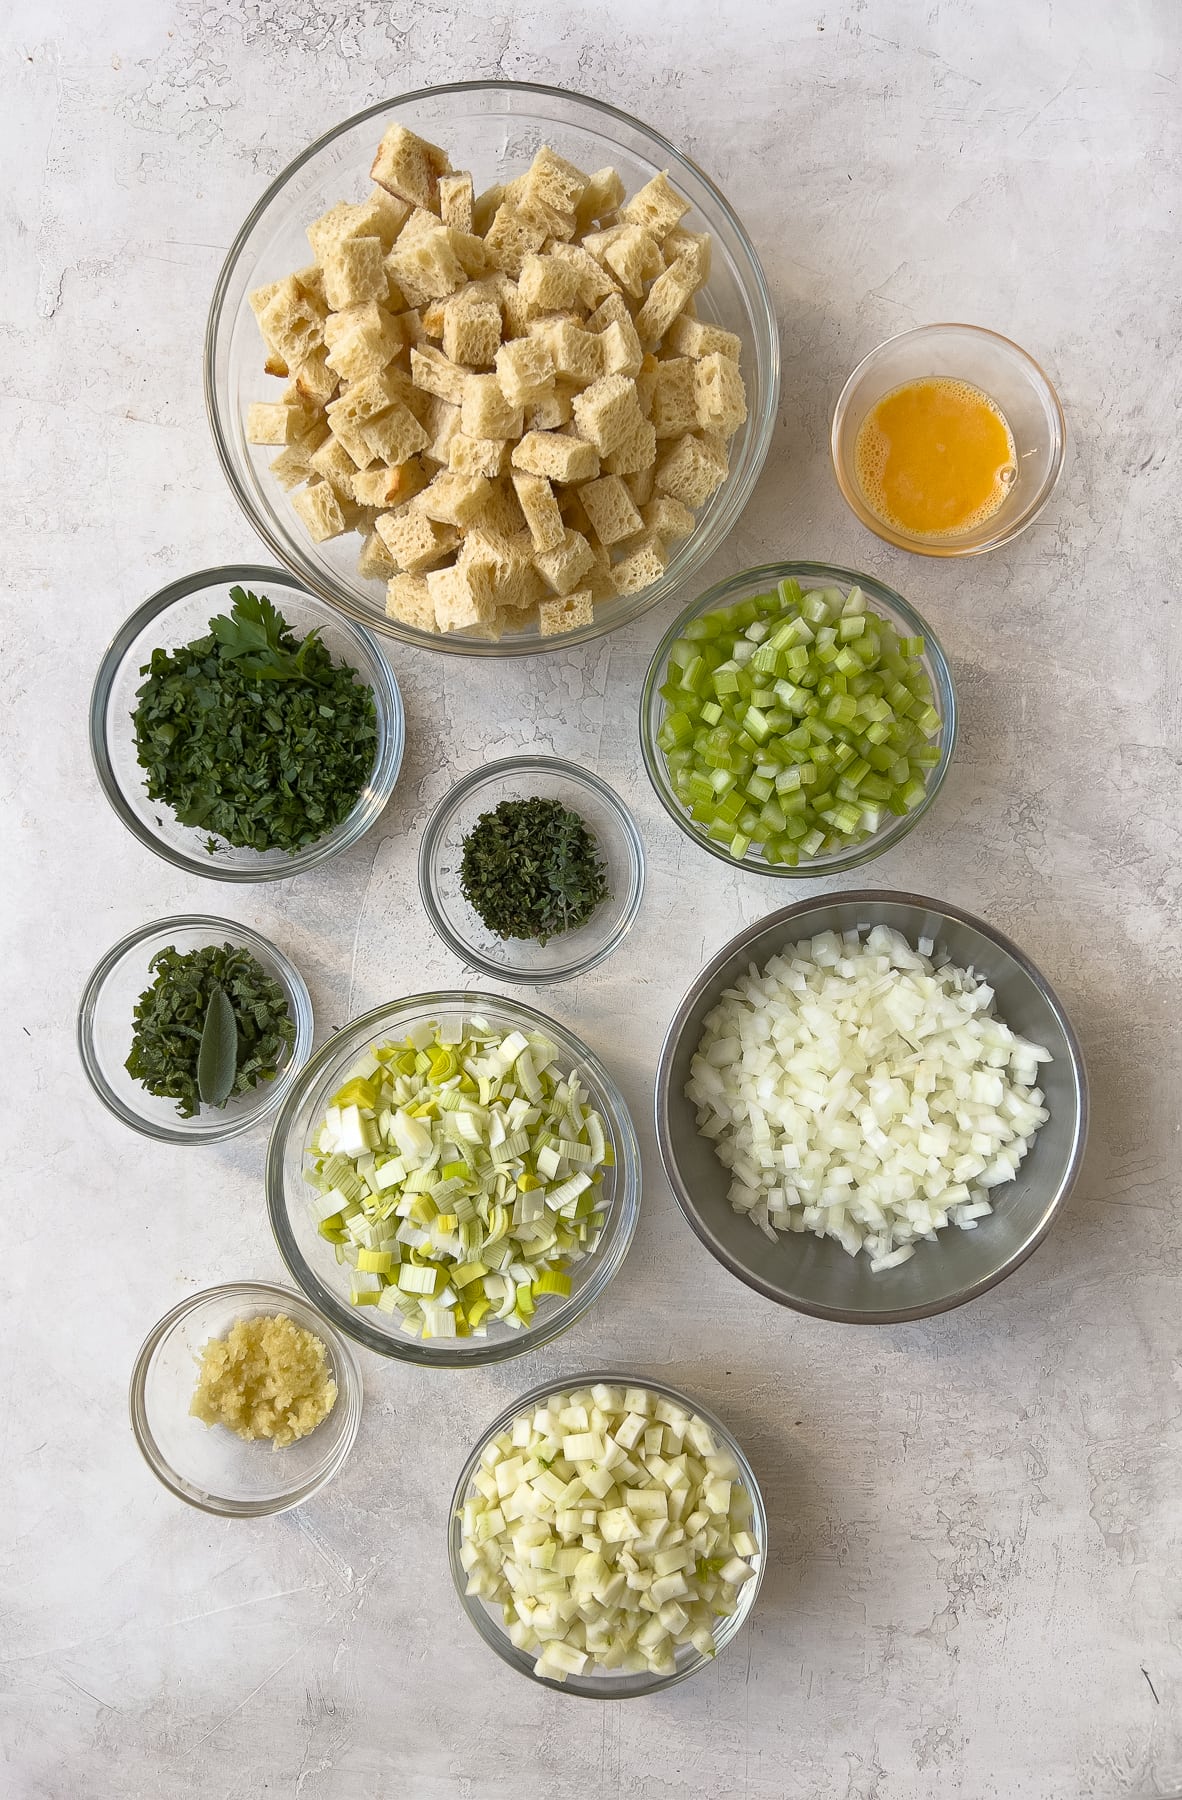 Prepped stuffing ingredients in bowls, ready to cook.